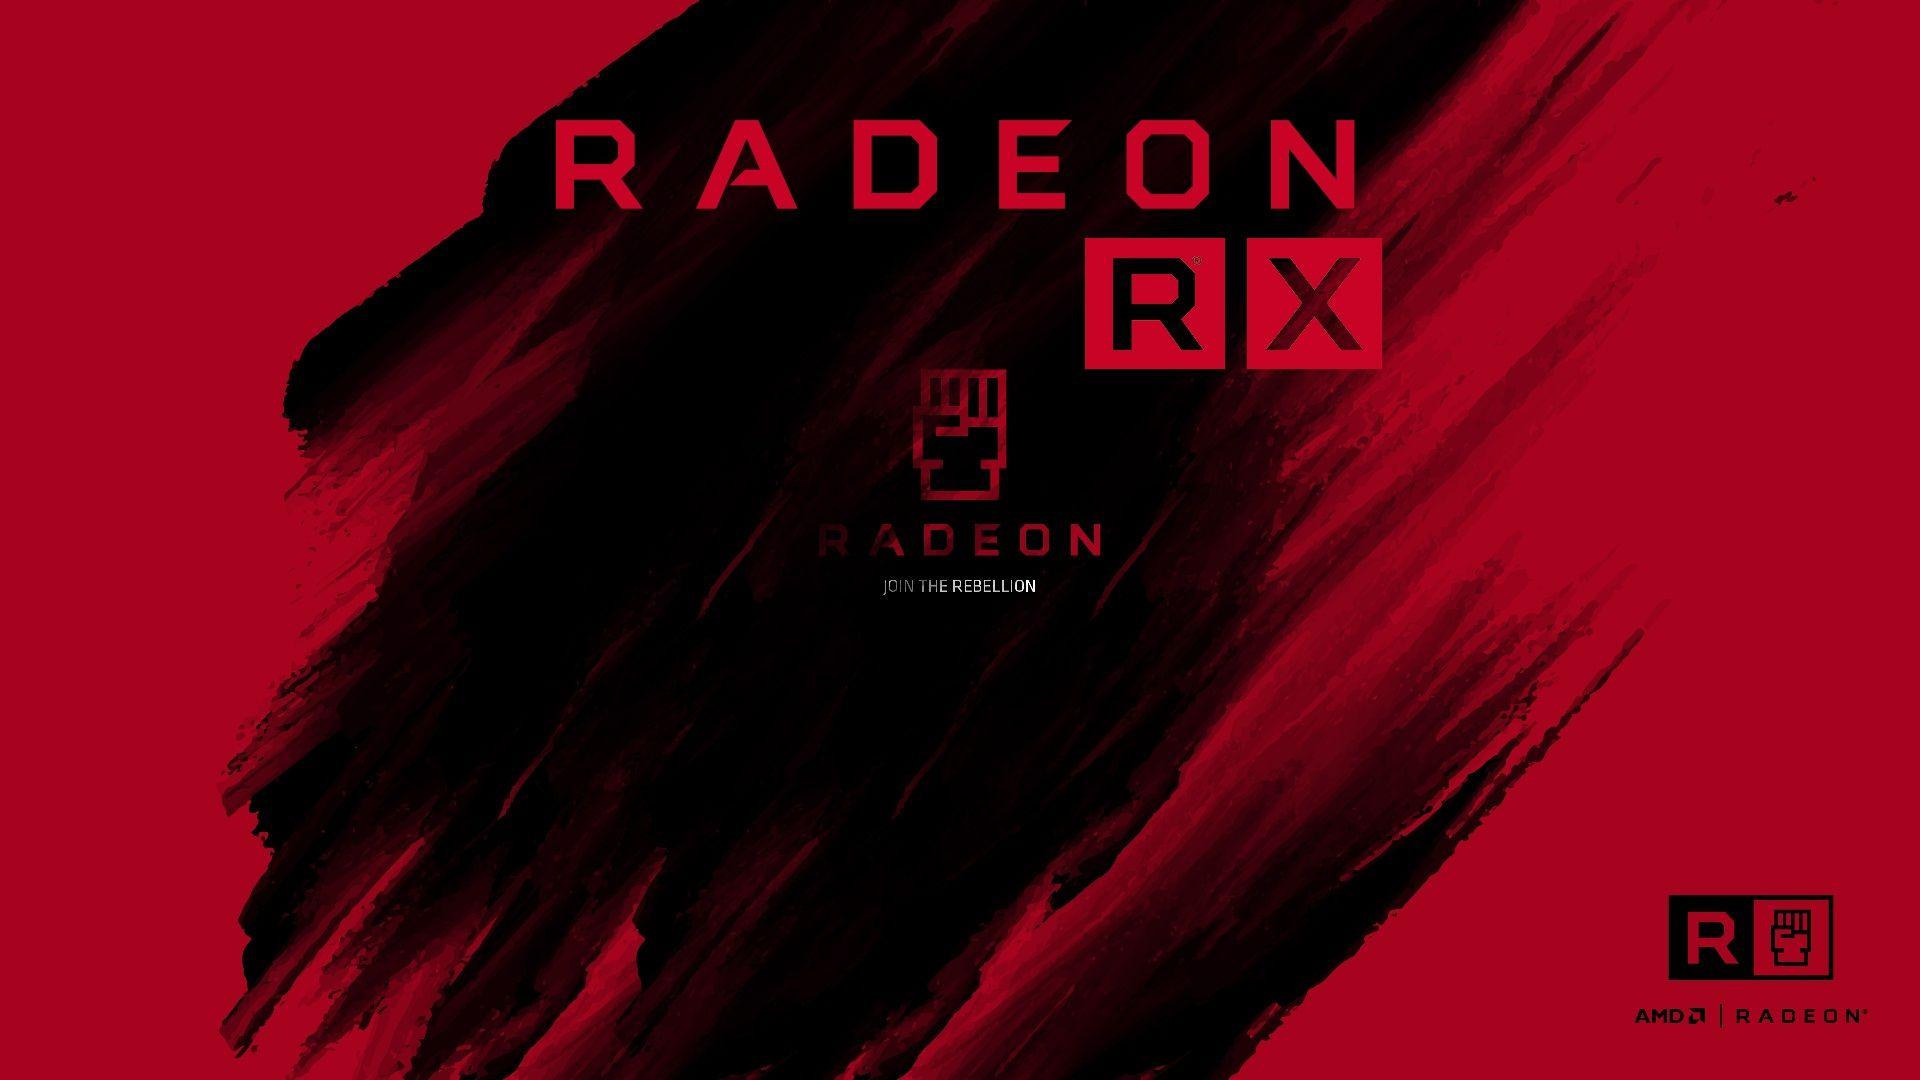 Up your game with AMD Radeon RX Vega, RX 580 or RX 570